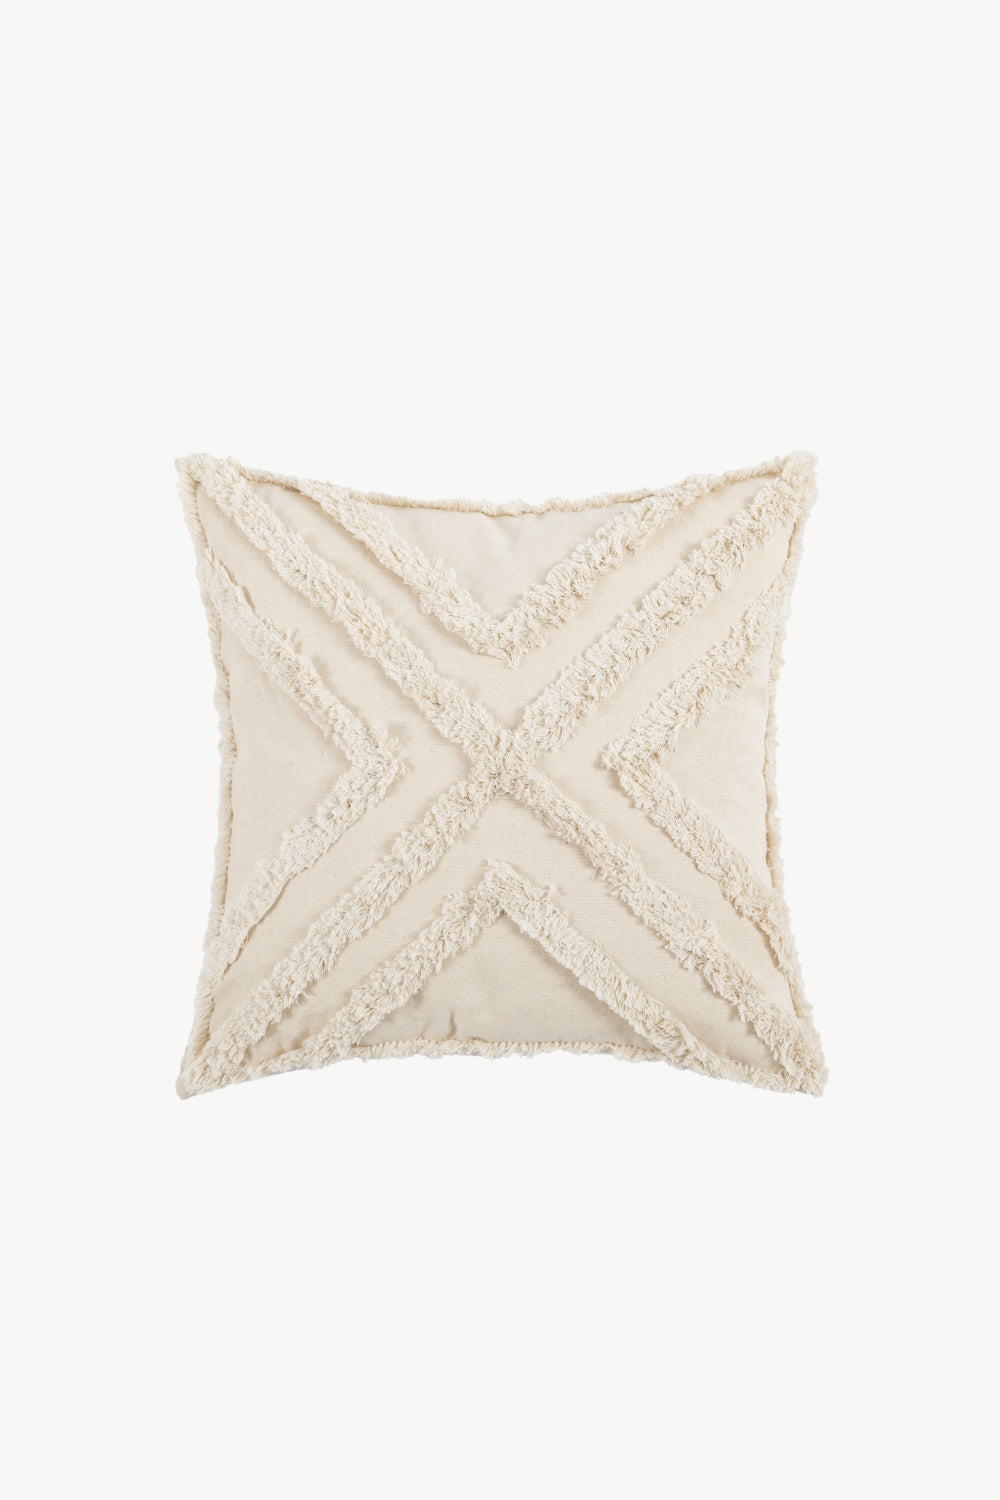 Fringe Decorative Throw Pillow Case-SHIPS DIRECTLY TO YOU!